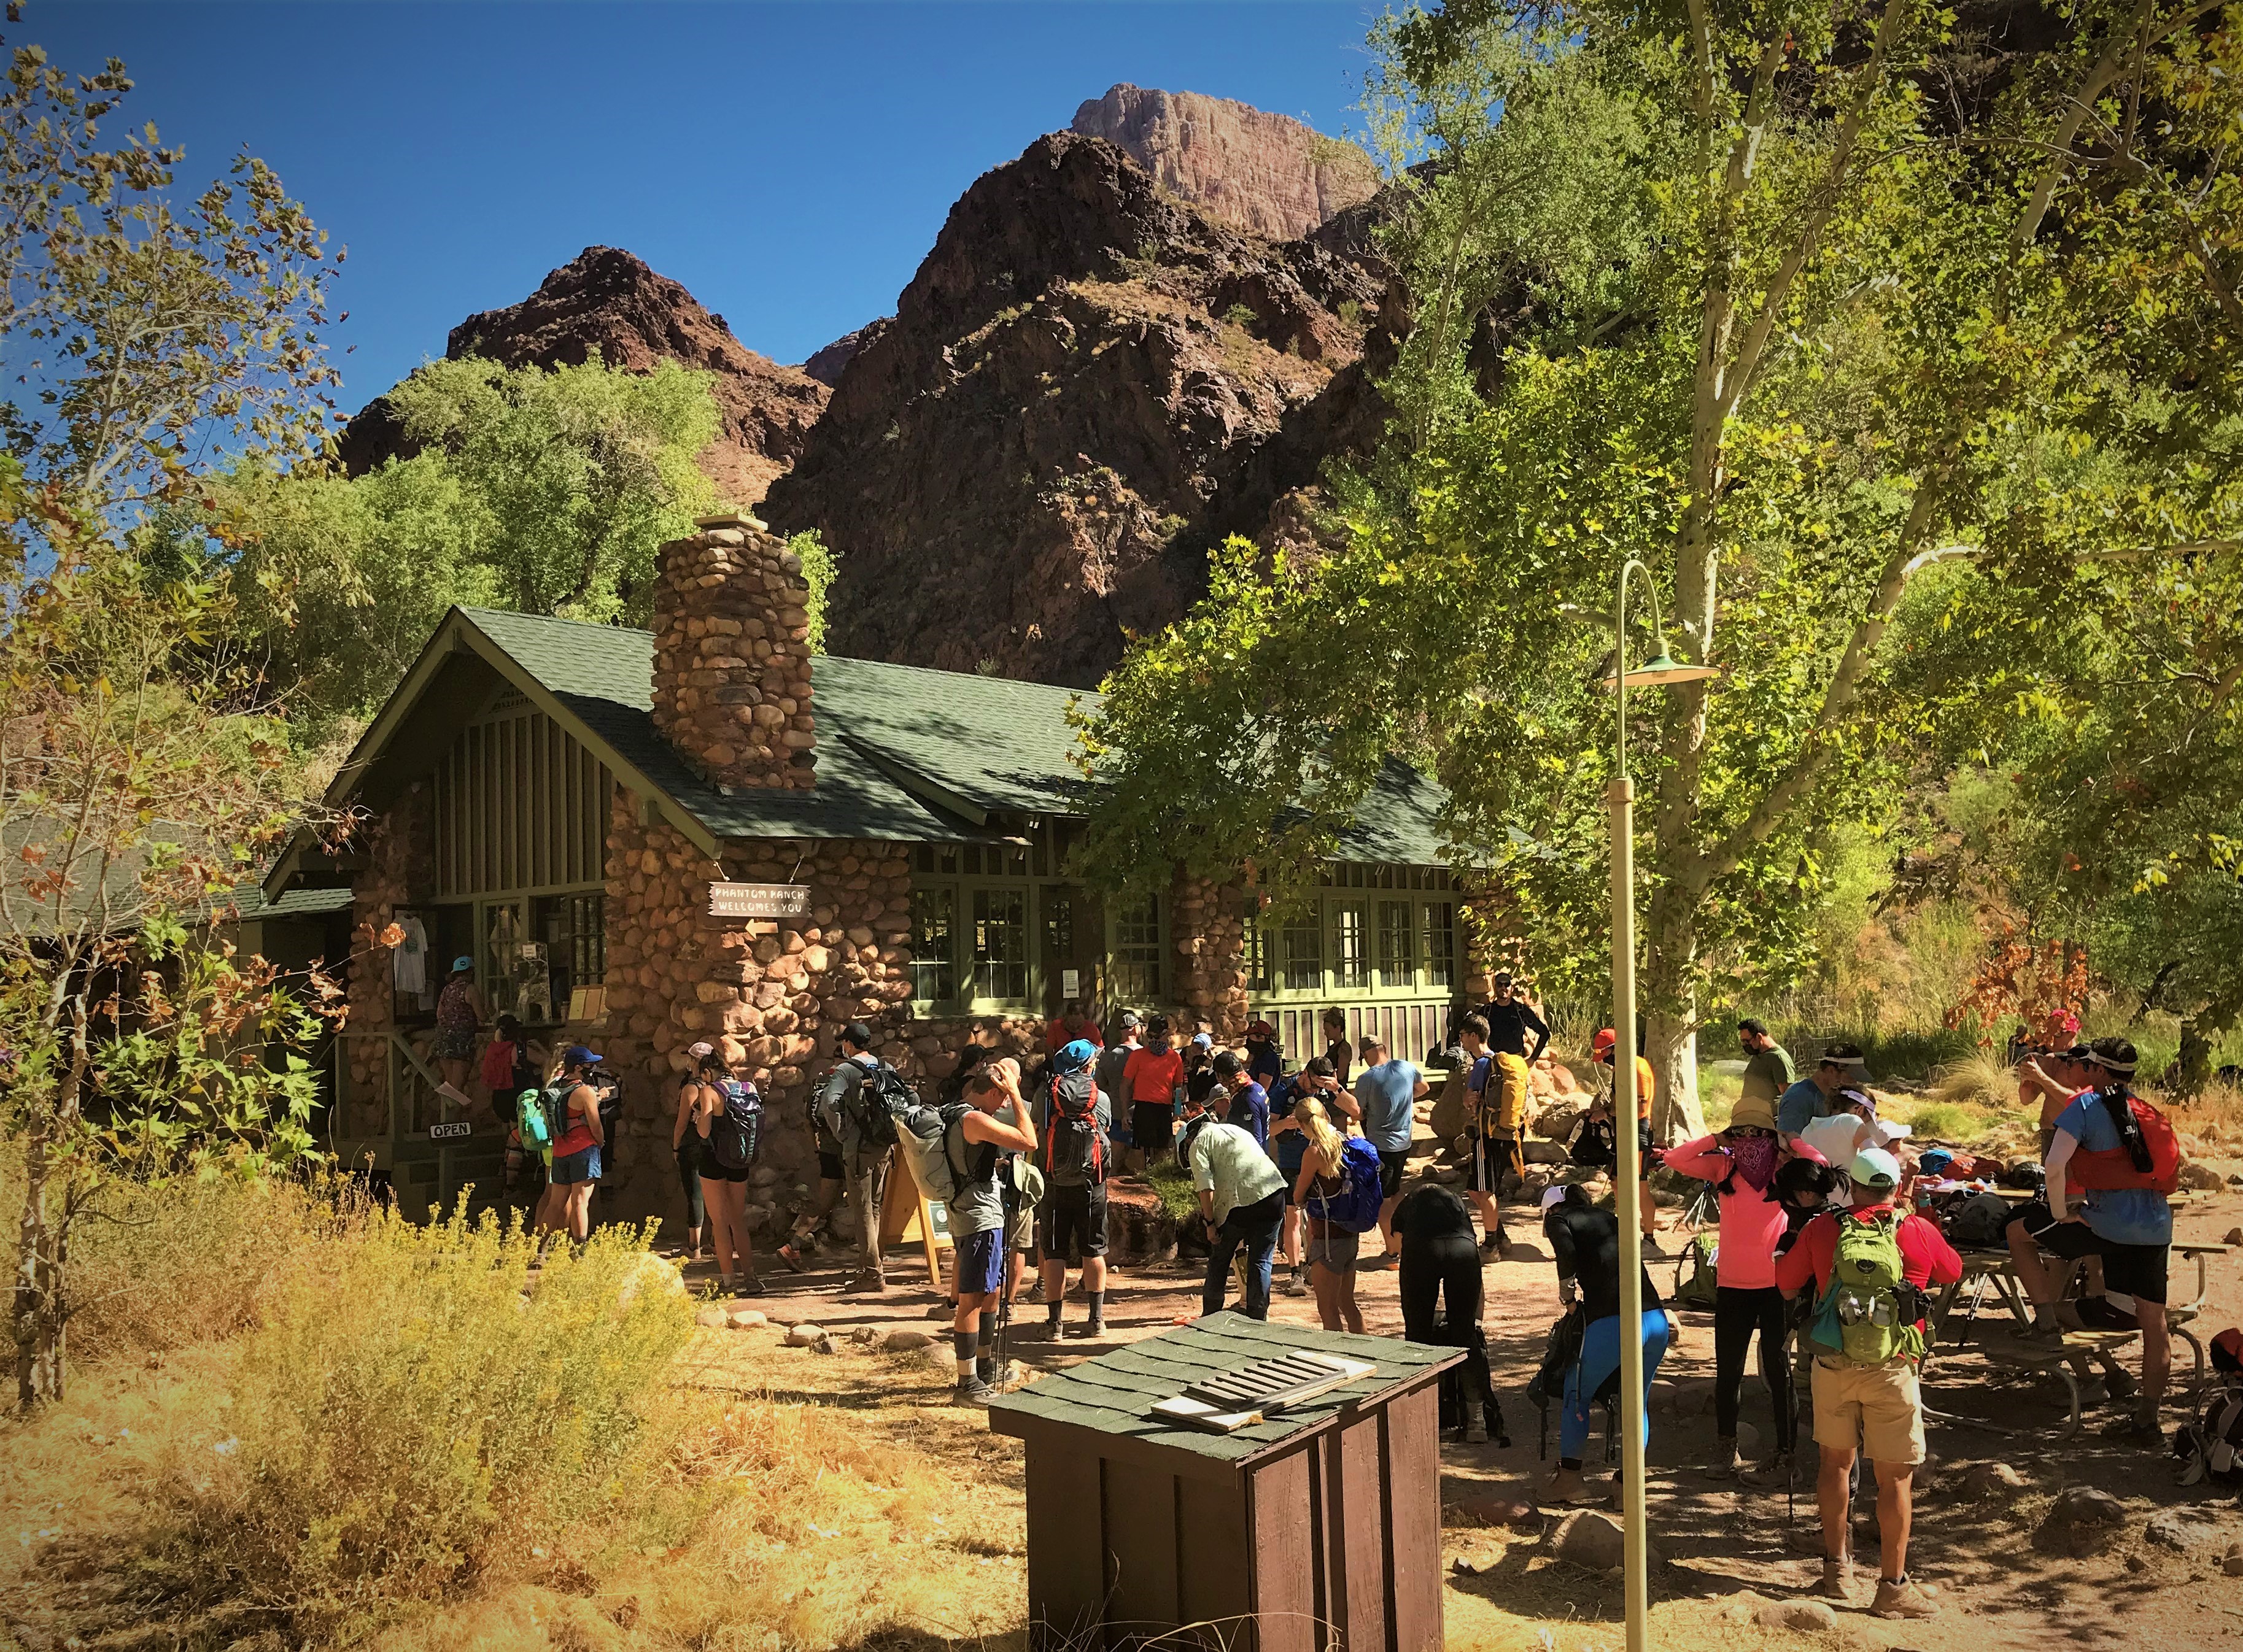 Visitors gather around the Phantom Ranch Canteen at the bottom of Grand Canyon